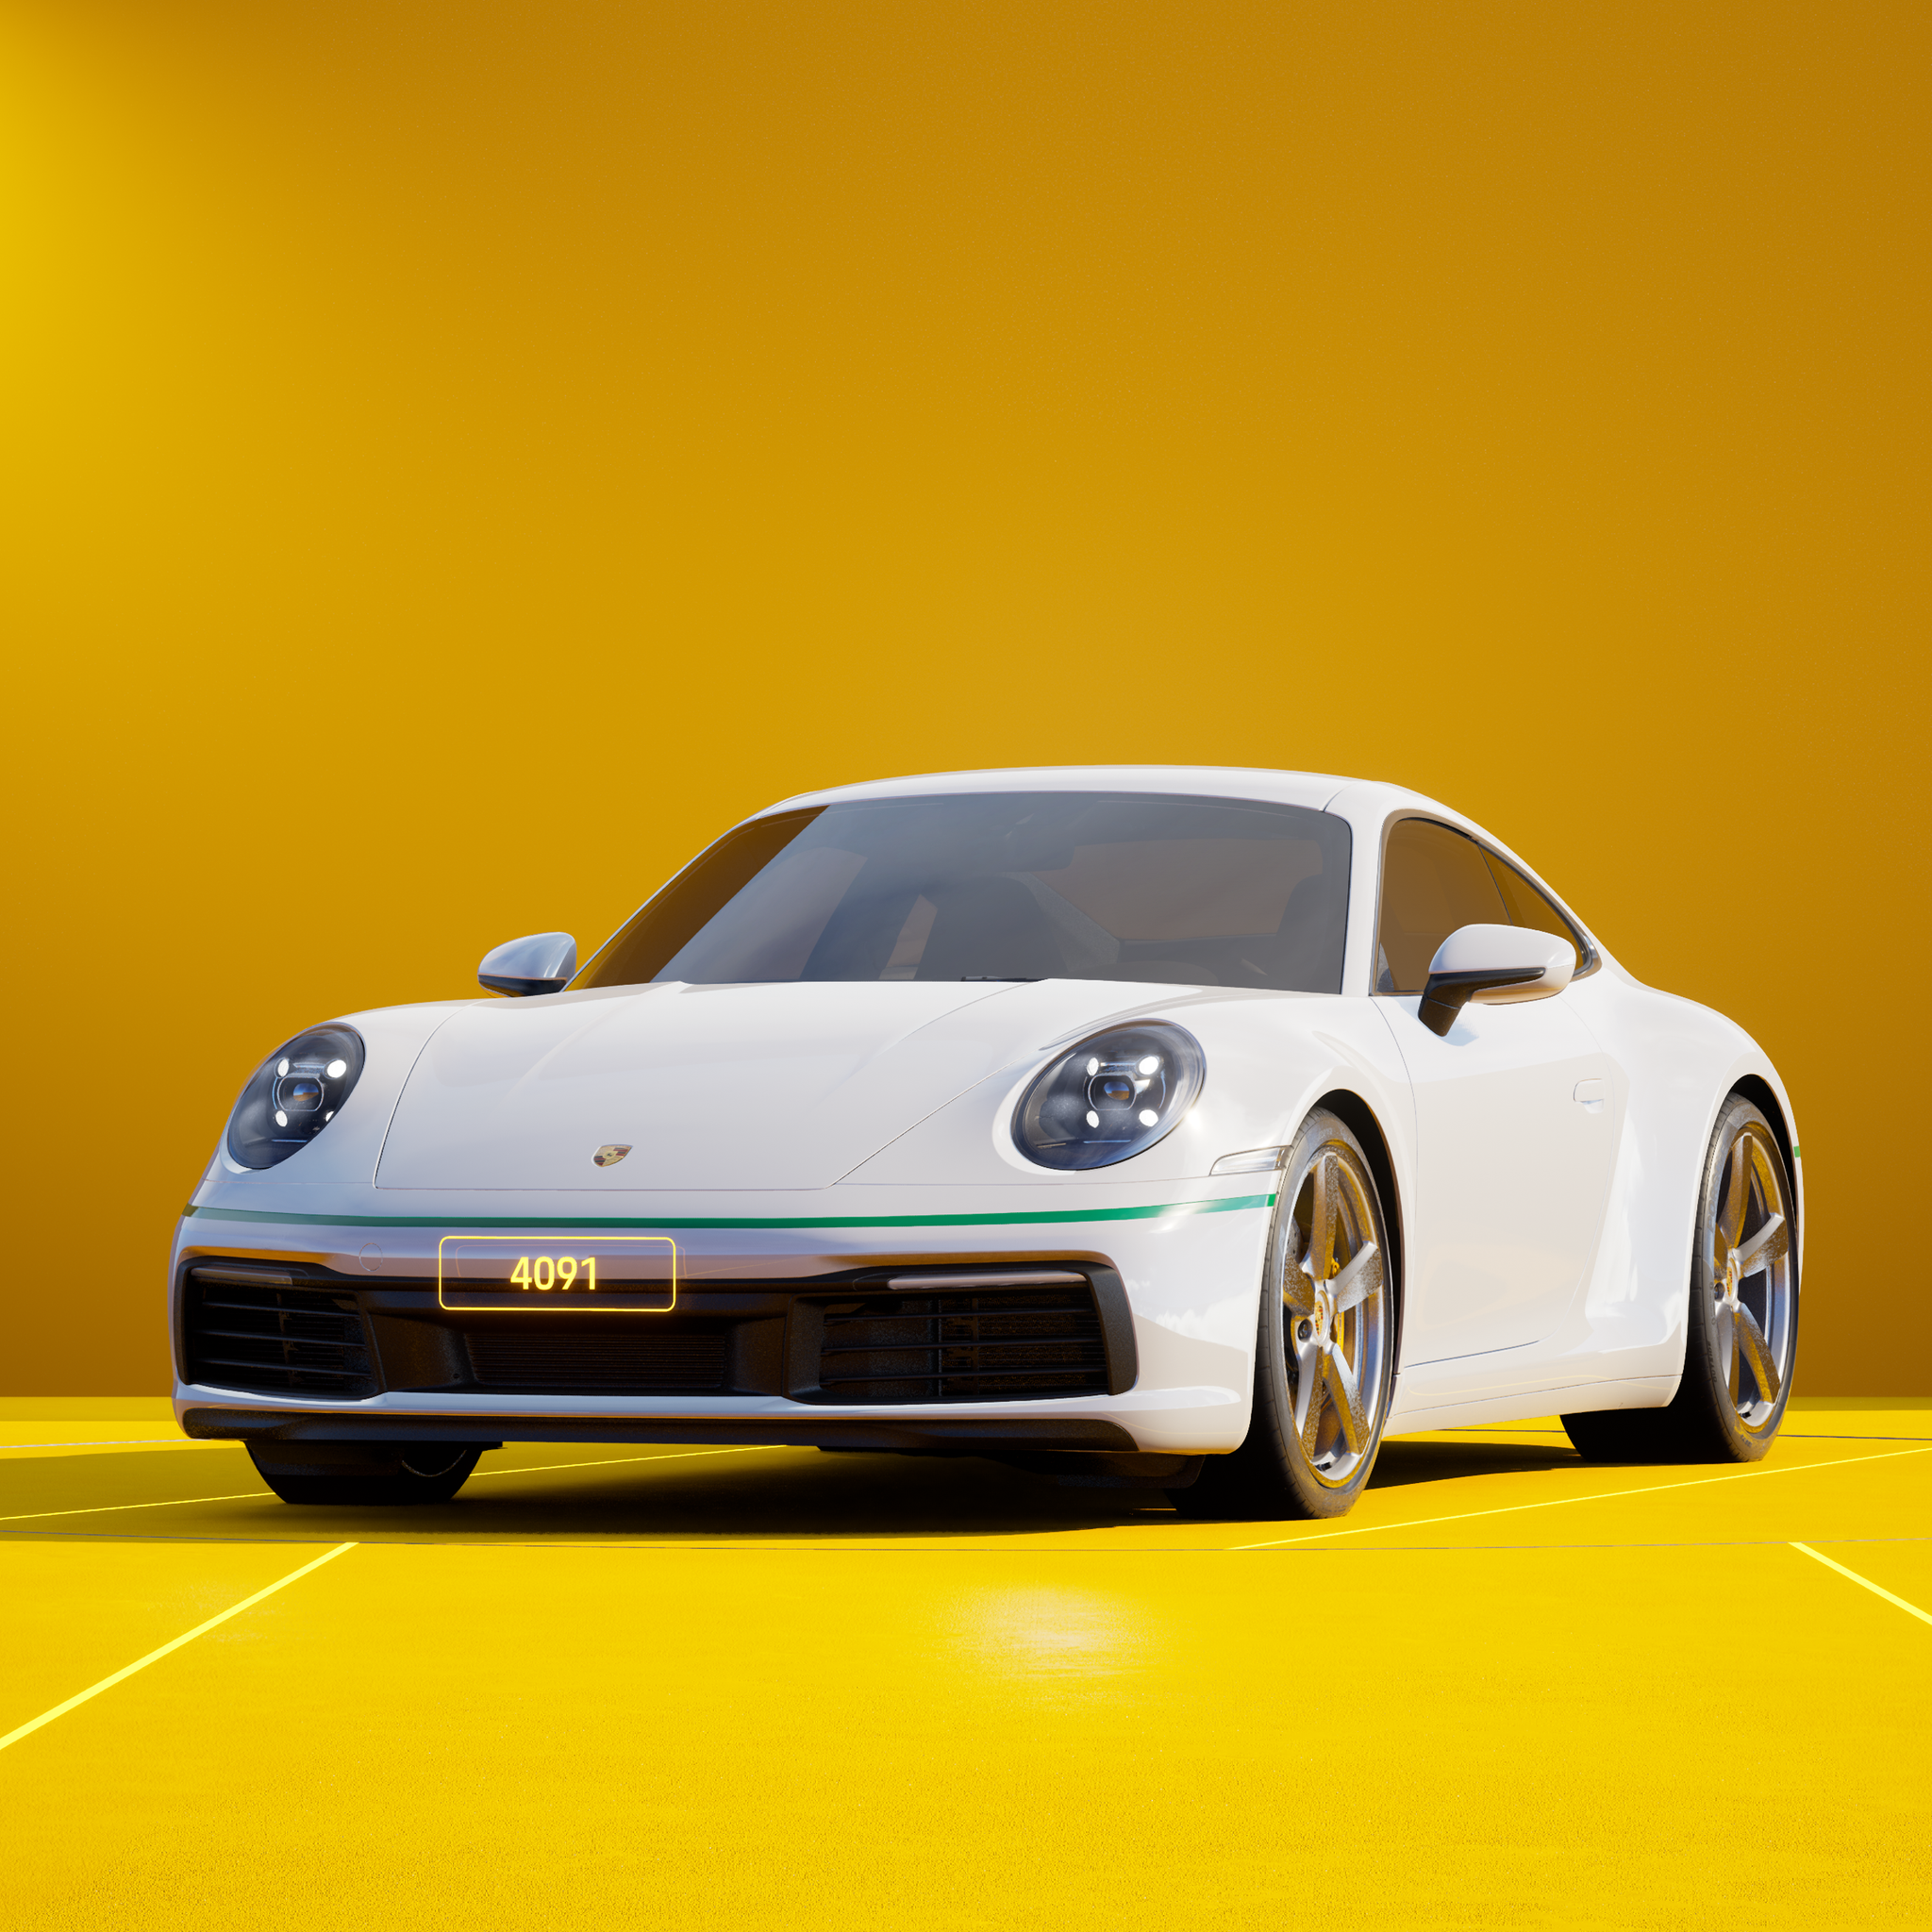 The PORSCHΞ 911 4091 image in phase